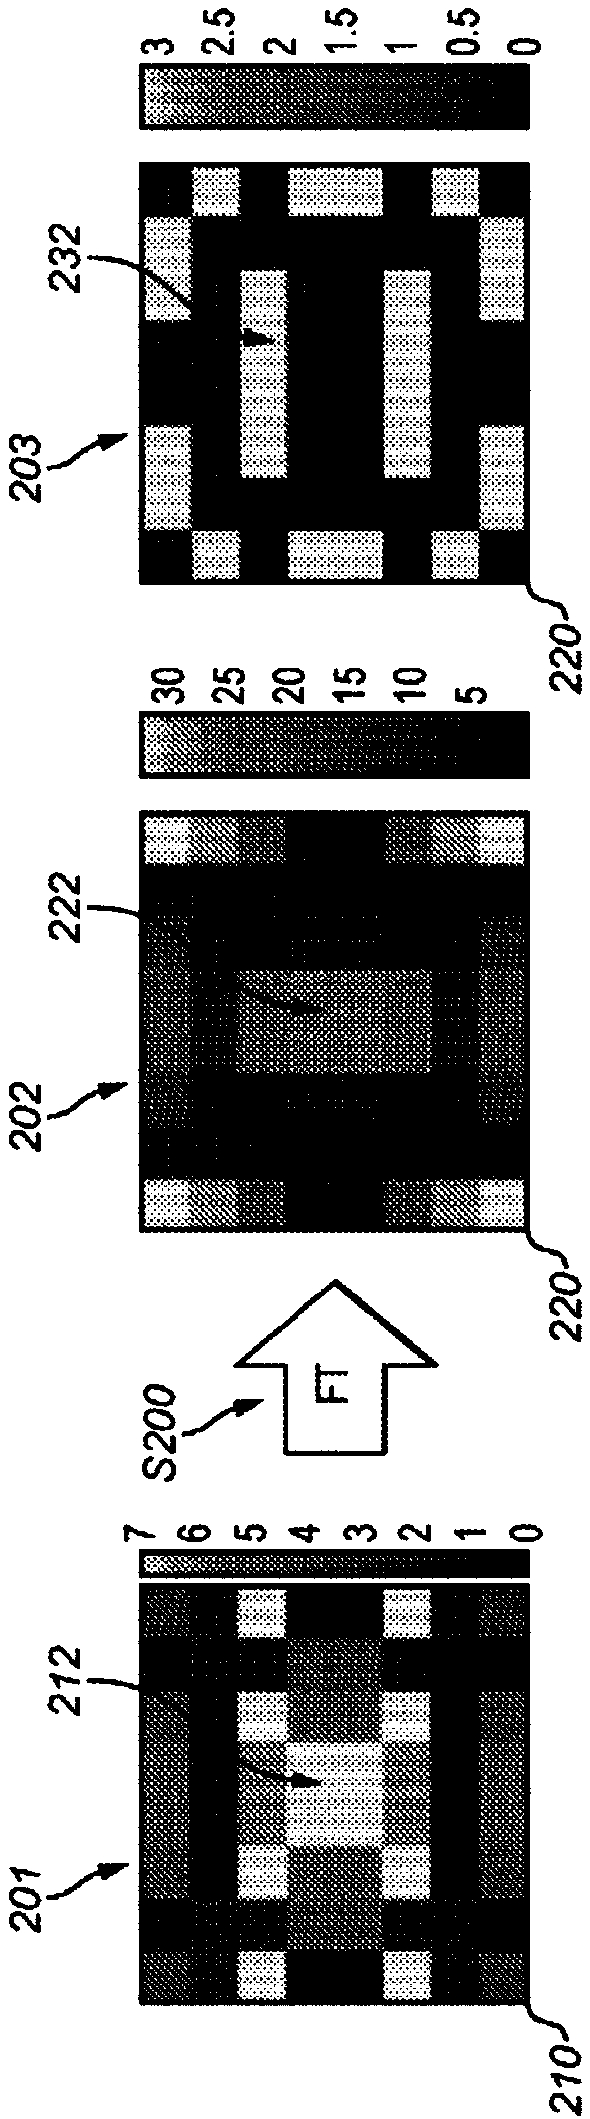 Method and apparatus for performing complex fourier transforms